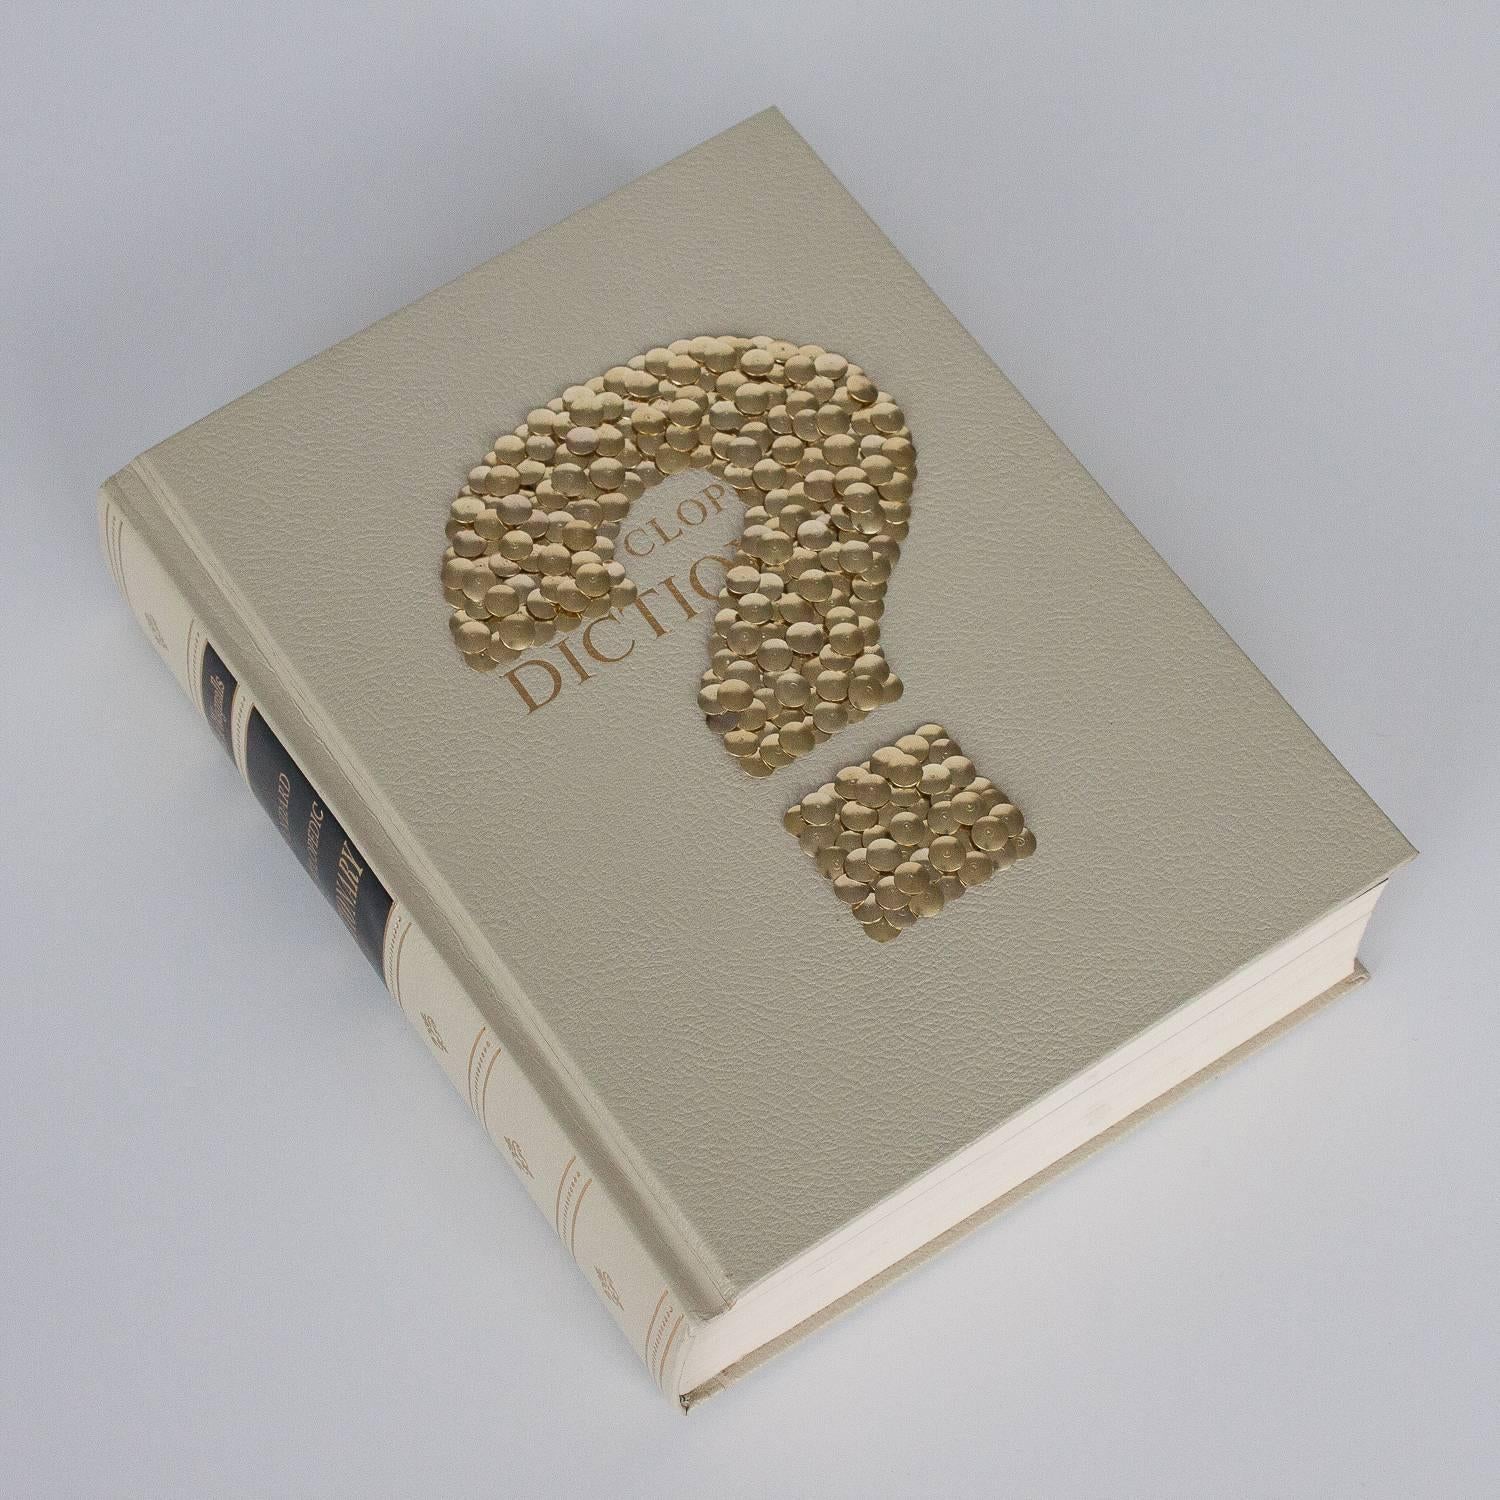 Modern Brass Adorned Dictionary by Brian Stanziale